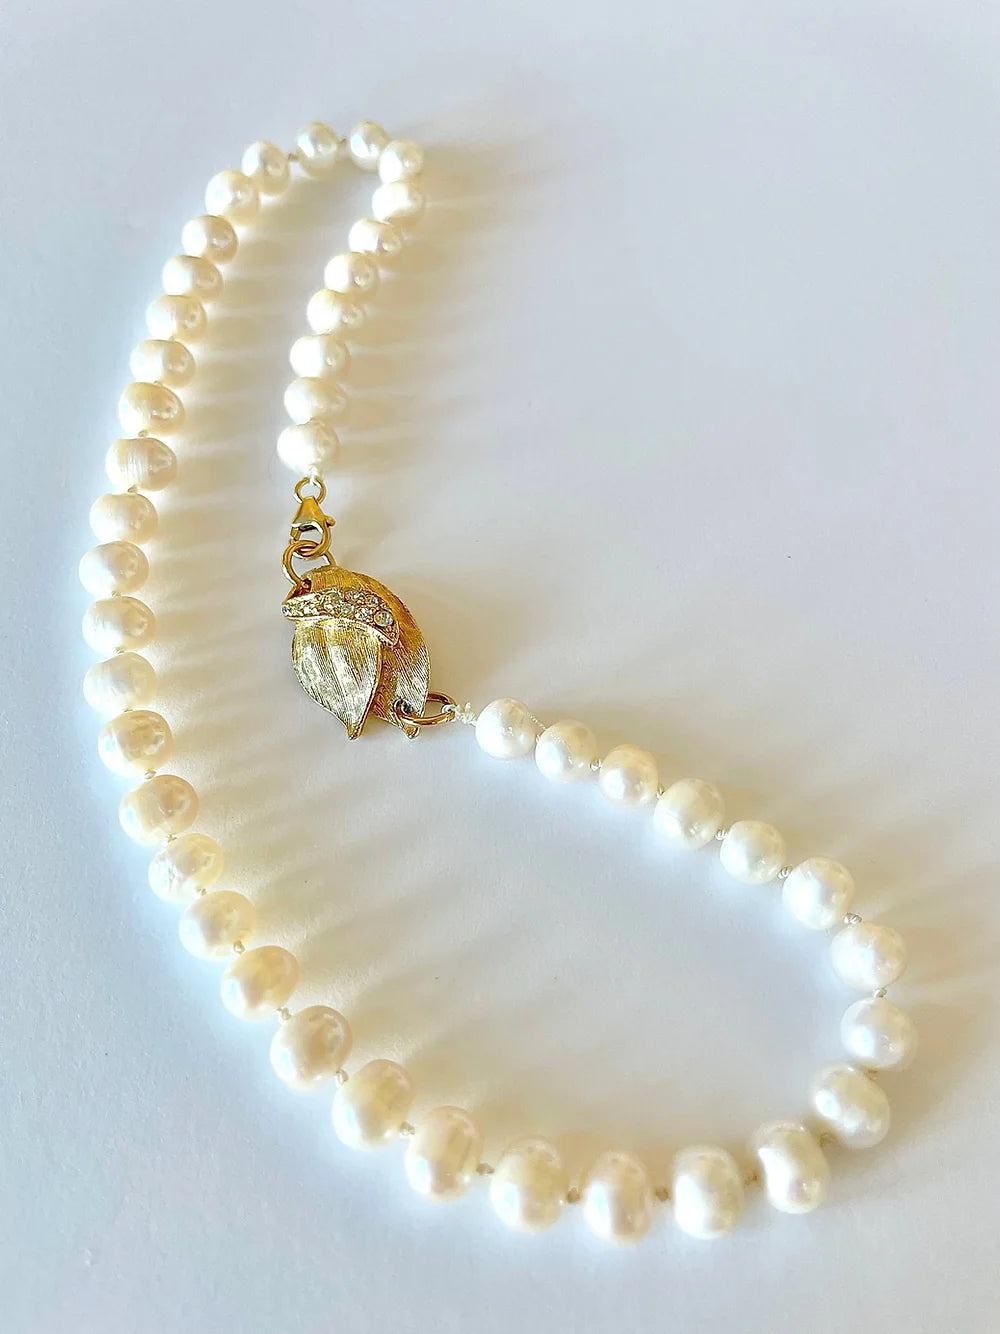 ONE OF A KIND CREAM BAROQUE PEARLS WITH VINTAGE EMBELLISHMENTS NECKLACE - JENN FENTON